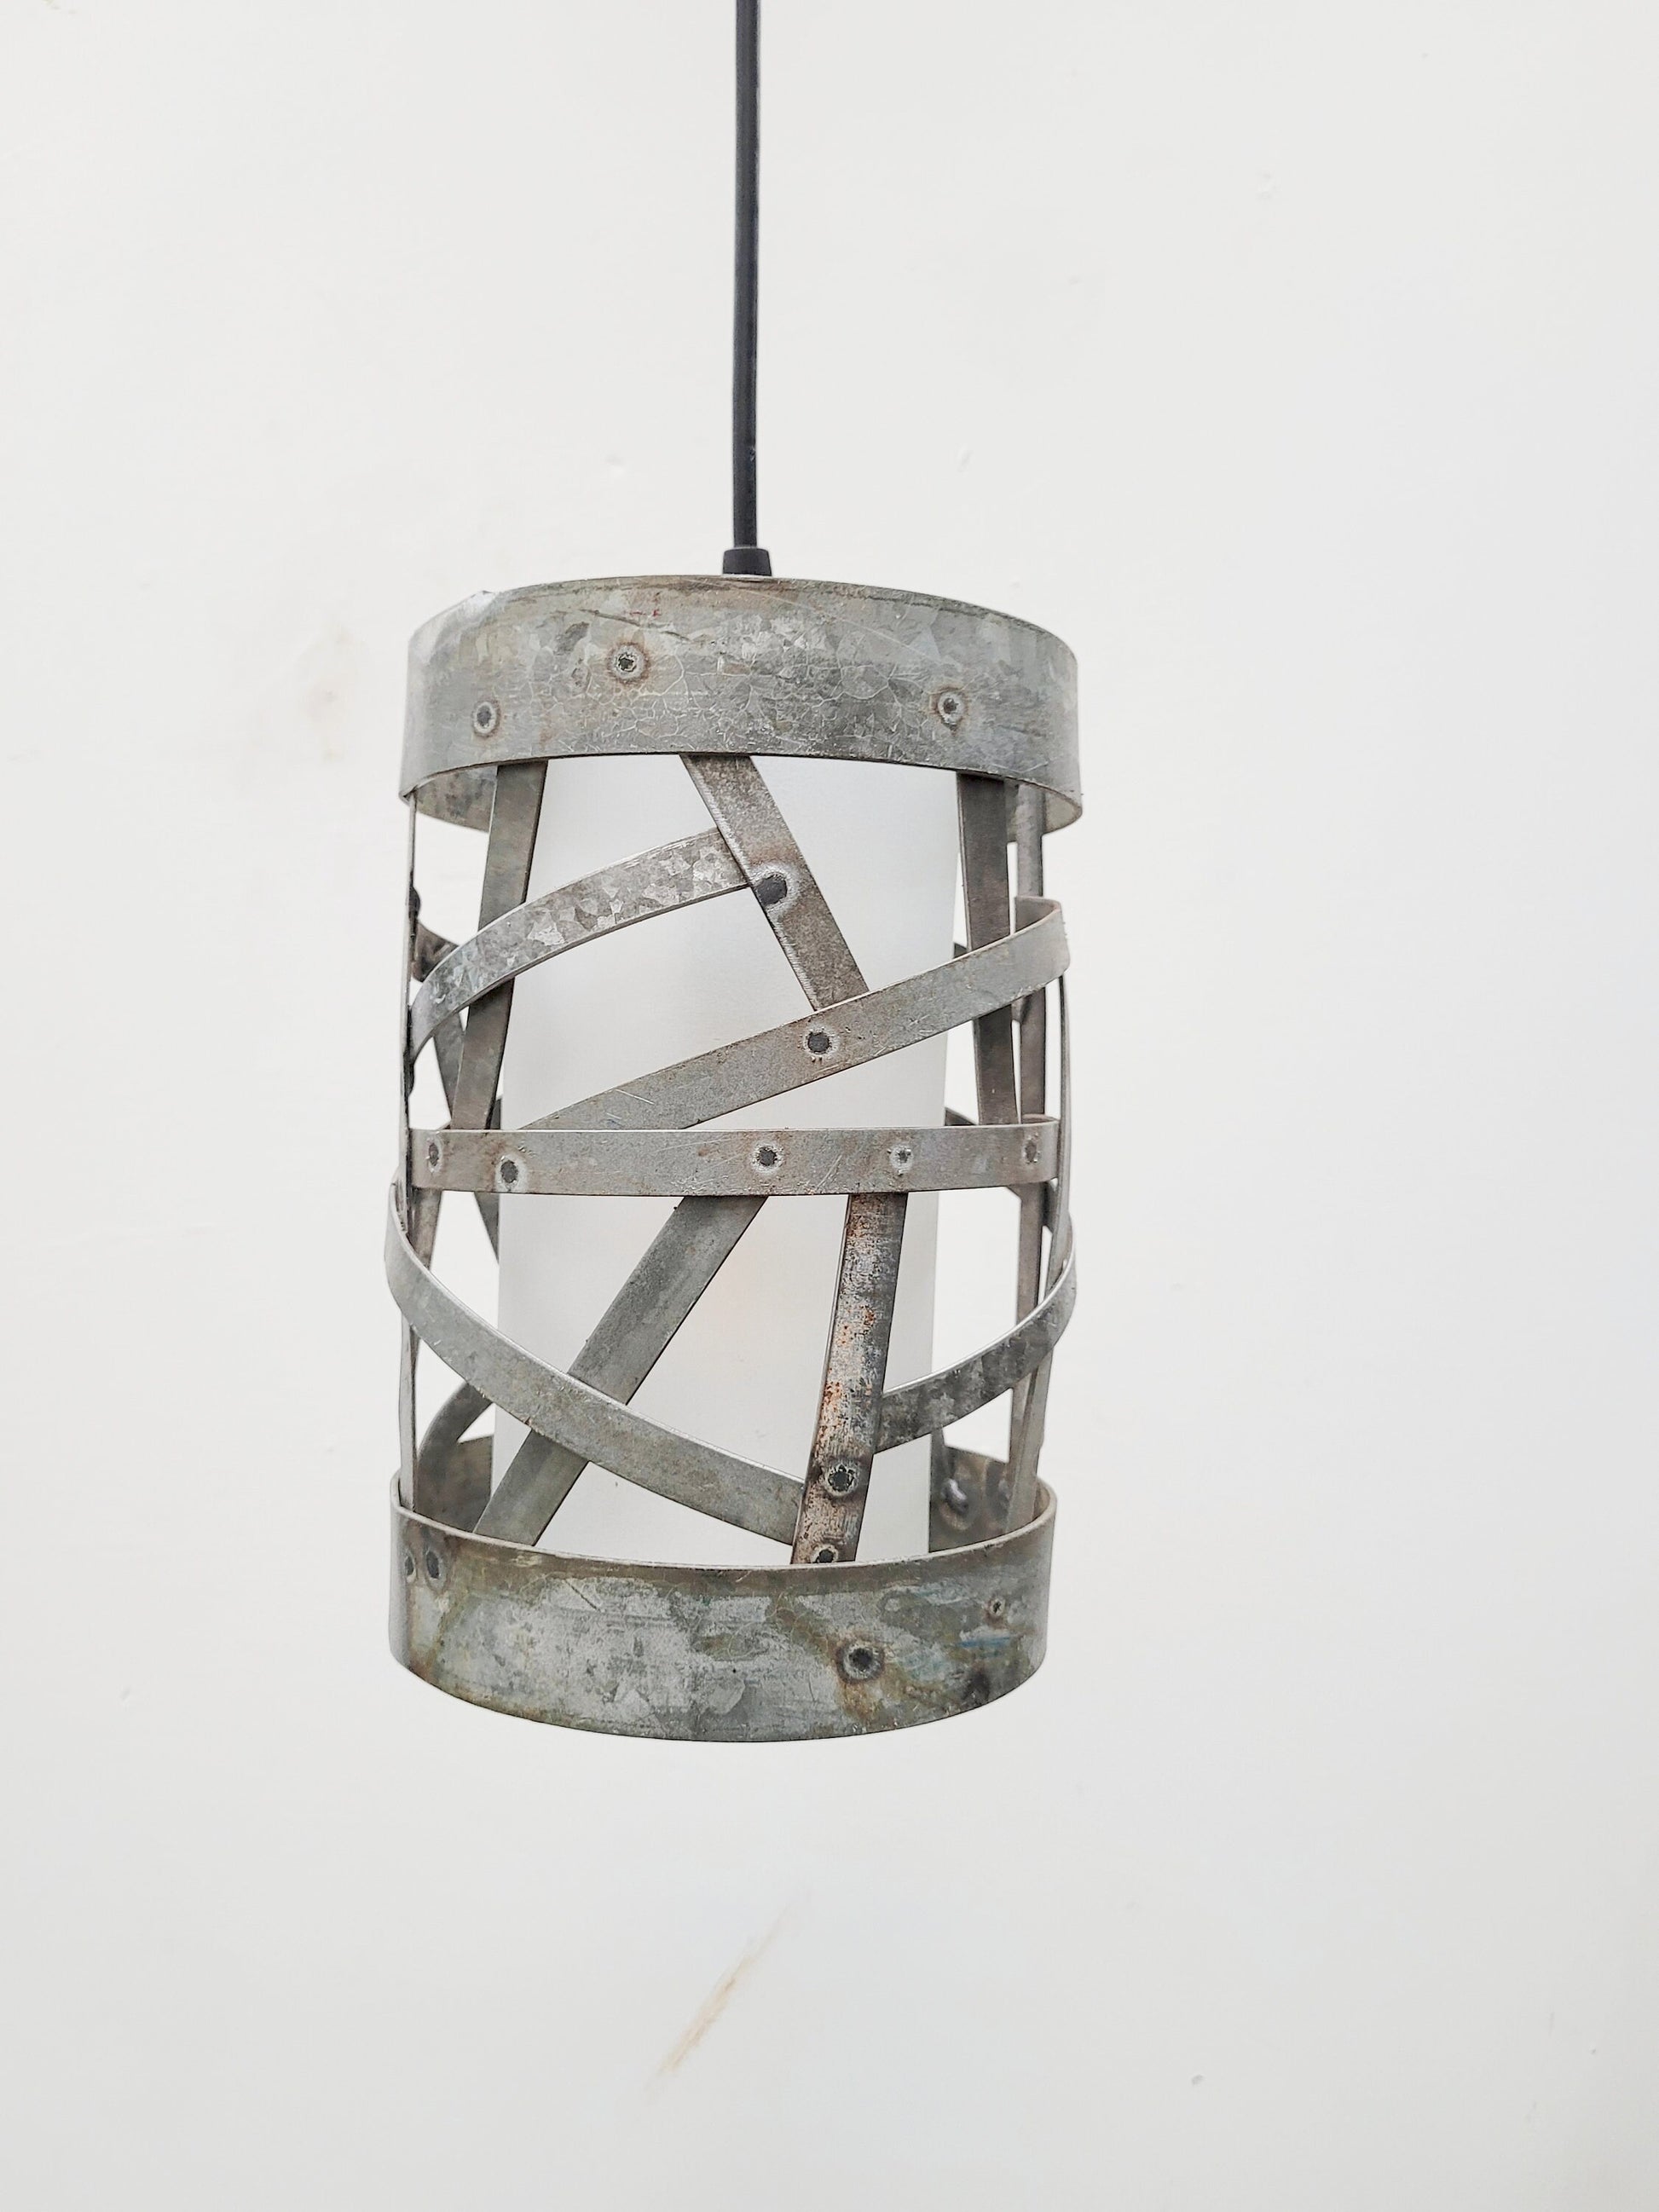 Wine Barrel Pendant Light - RURA - Made from retired Napa wine barrel rings and bottles - 100% Recycled!